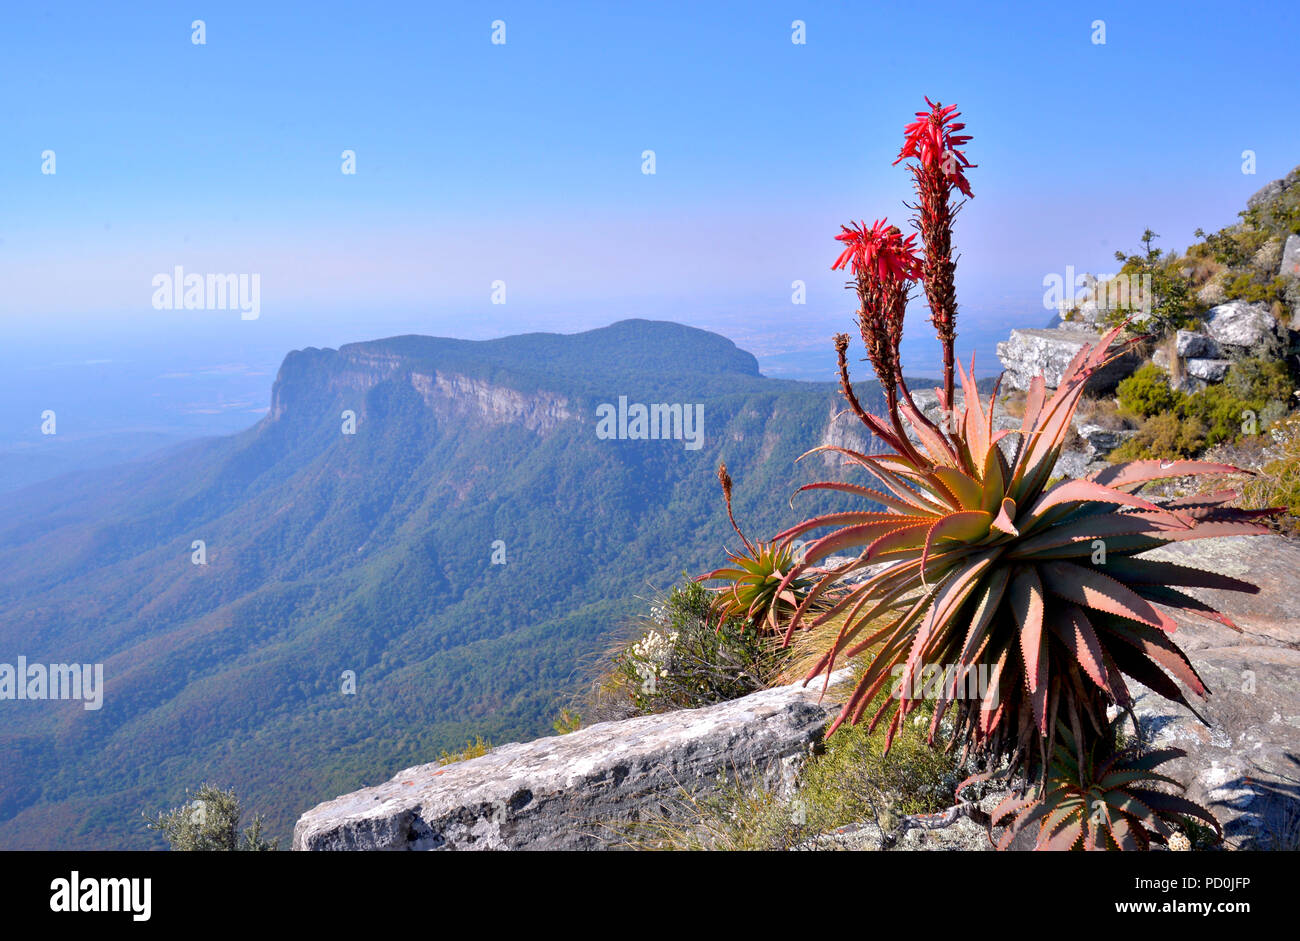 South Africa, a fantastic travel destination to experience third and first world together. View over Mpumalanga lowveld from Mariepskop mountain. Stock Photo